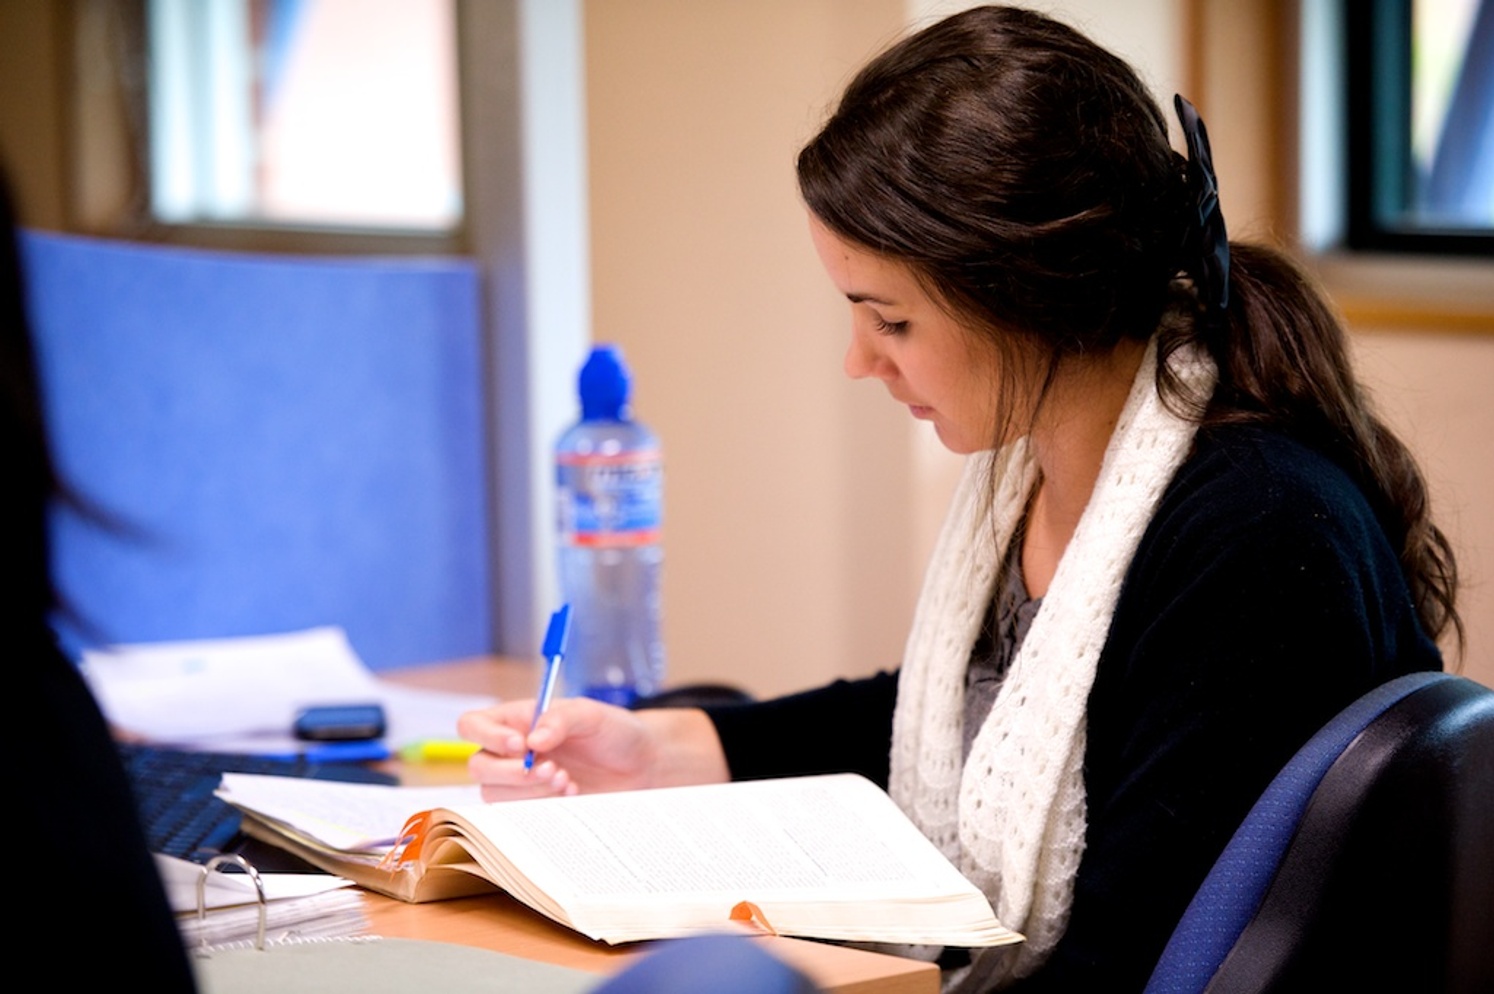 A student doing research at a desk with pen and paper